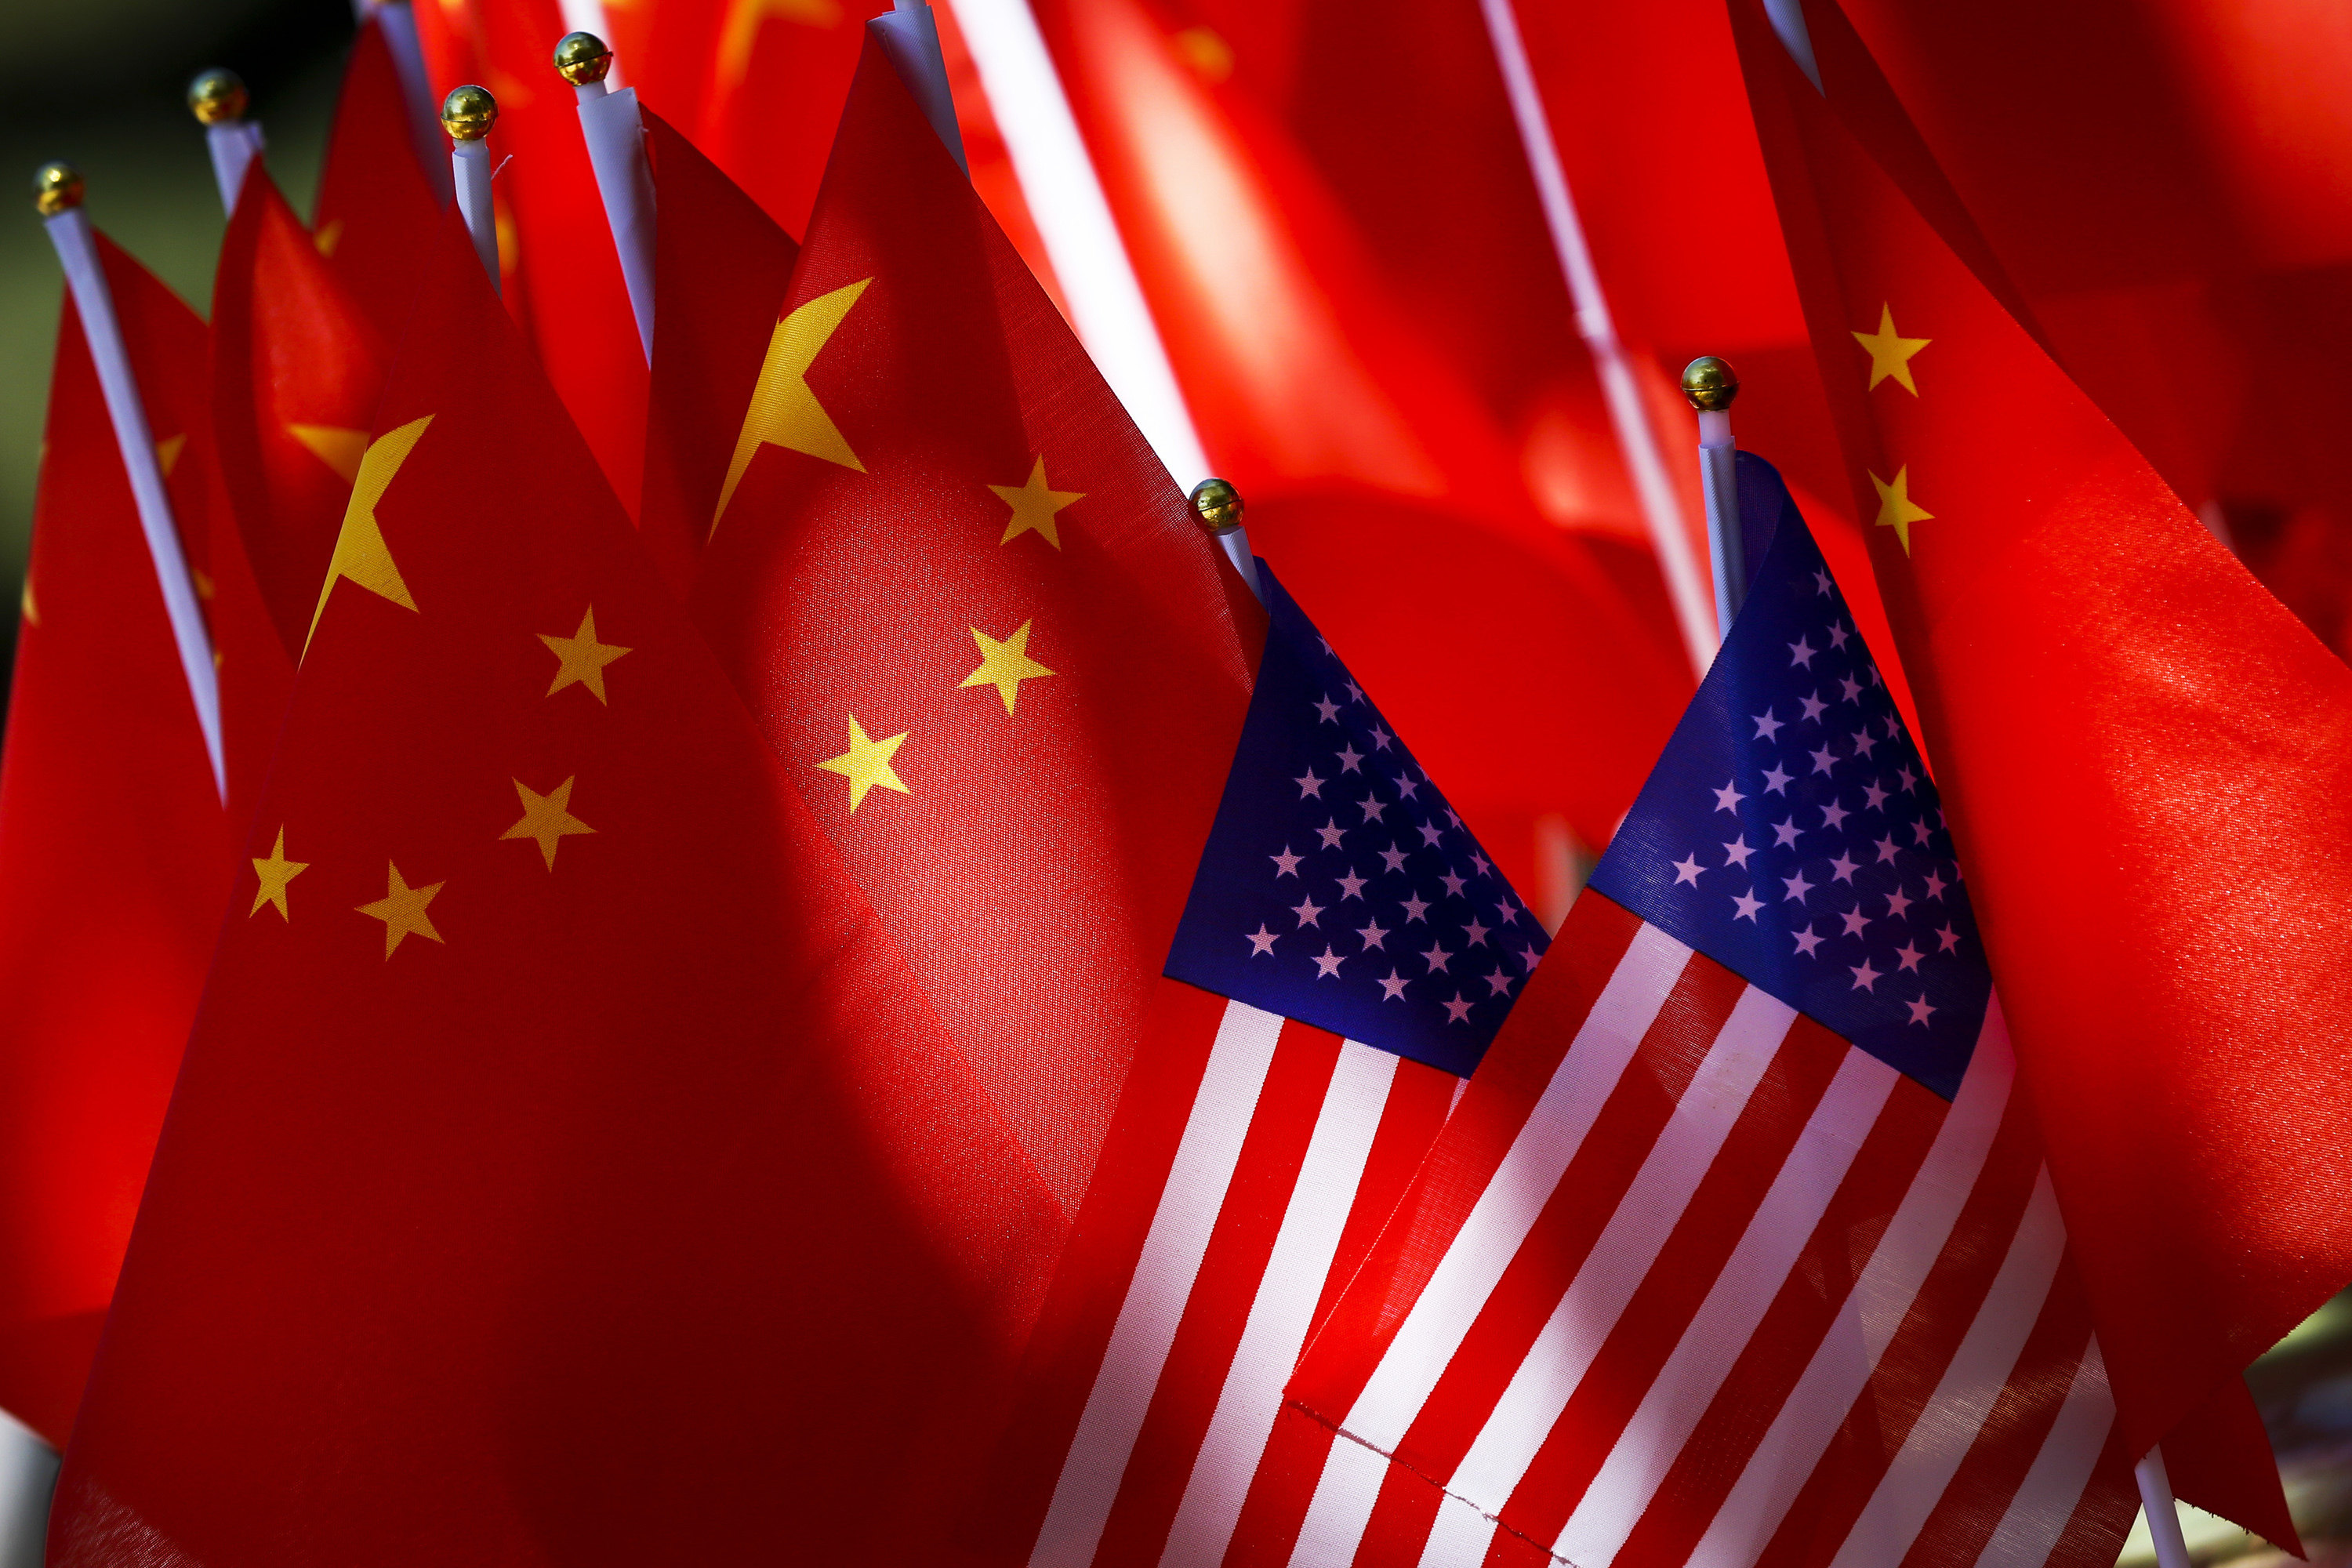 The flags of the U.S. and Chinese are displayed together. Photo: AP